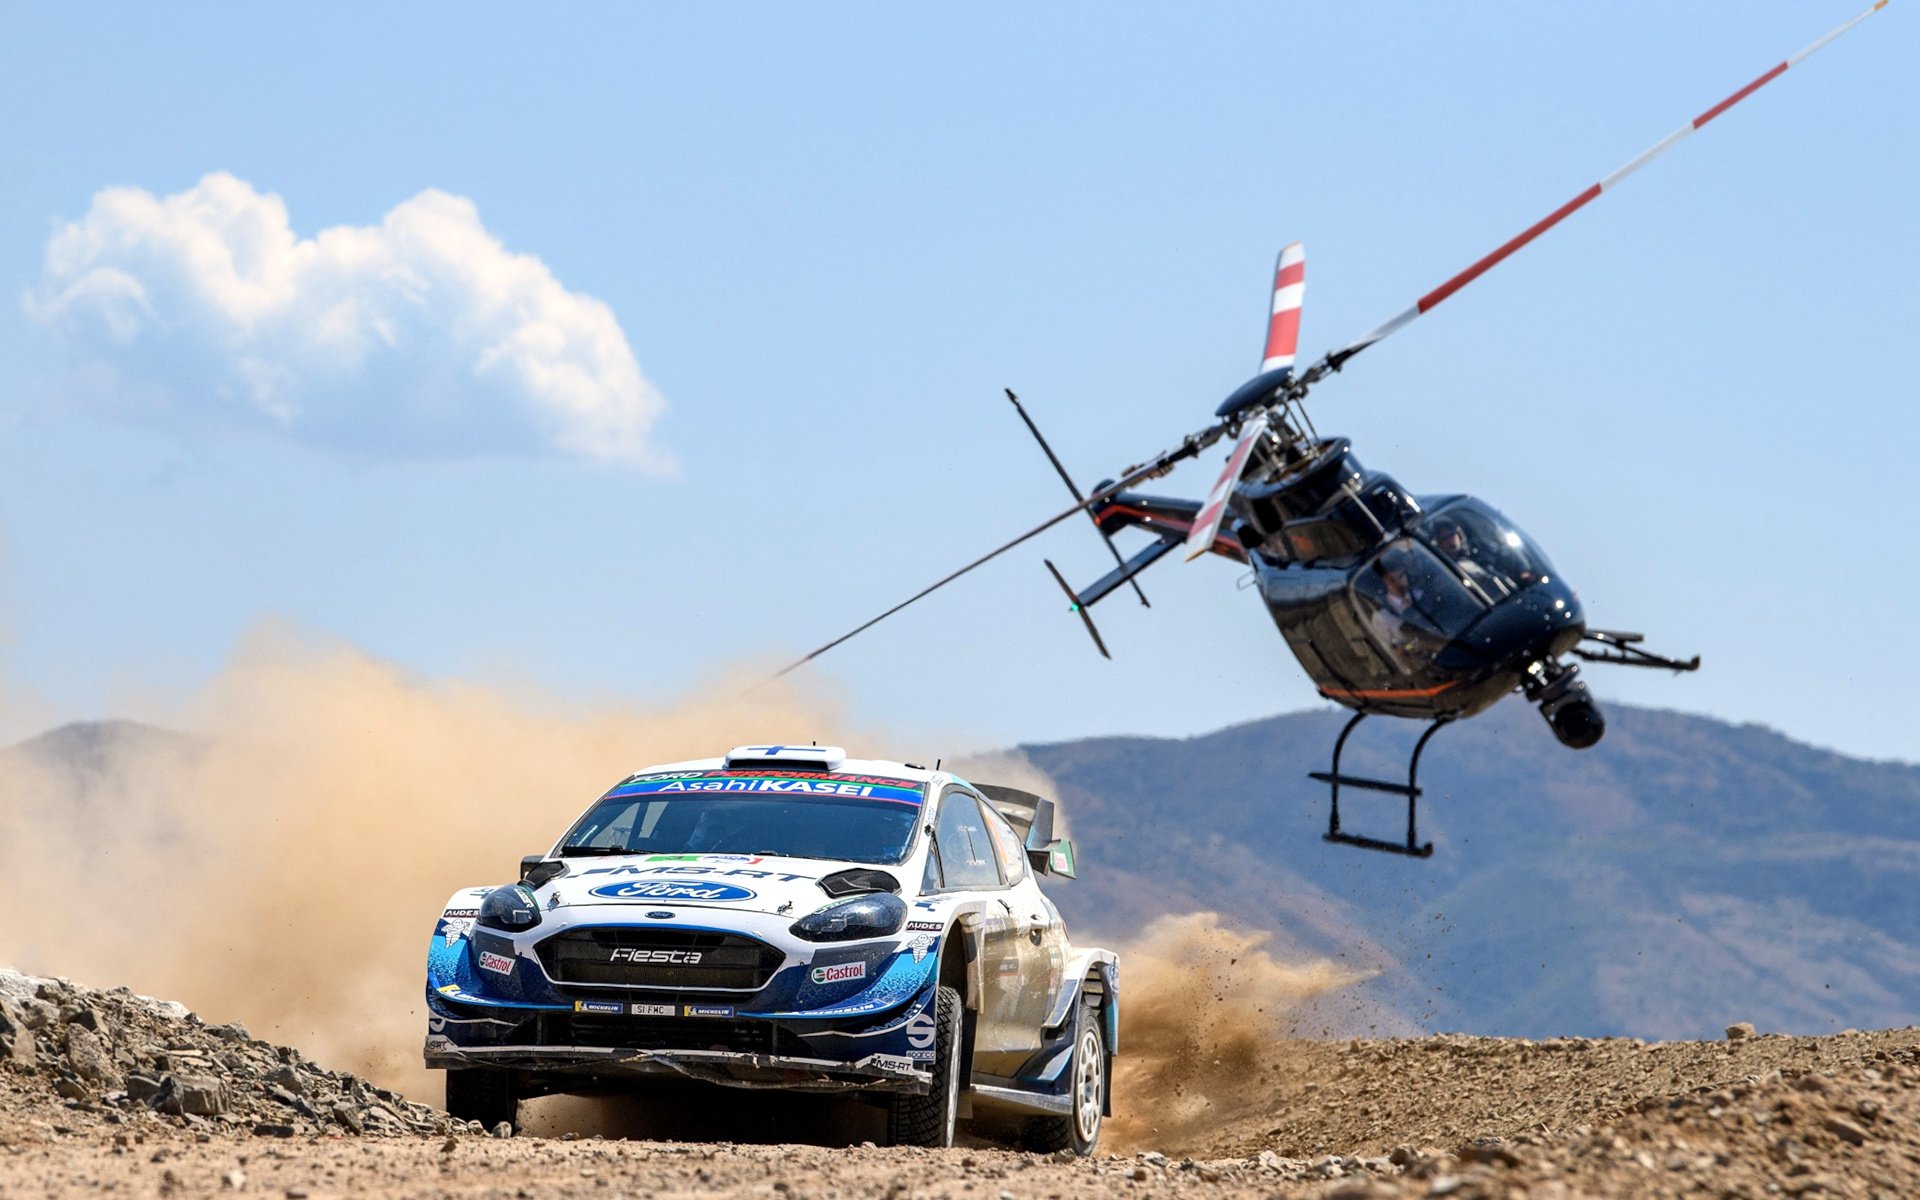 KCB unveils A Helicopter for The WCR Safari Rally Taarifa News